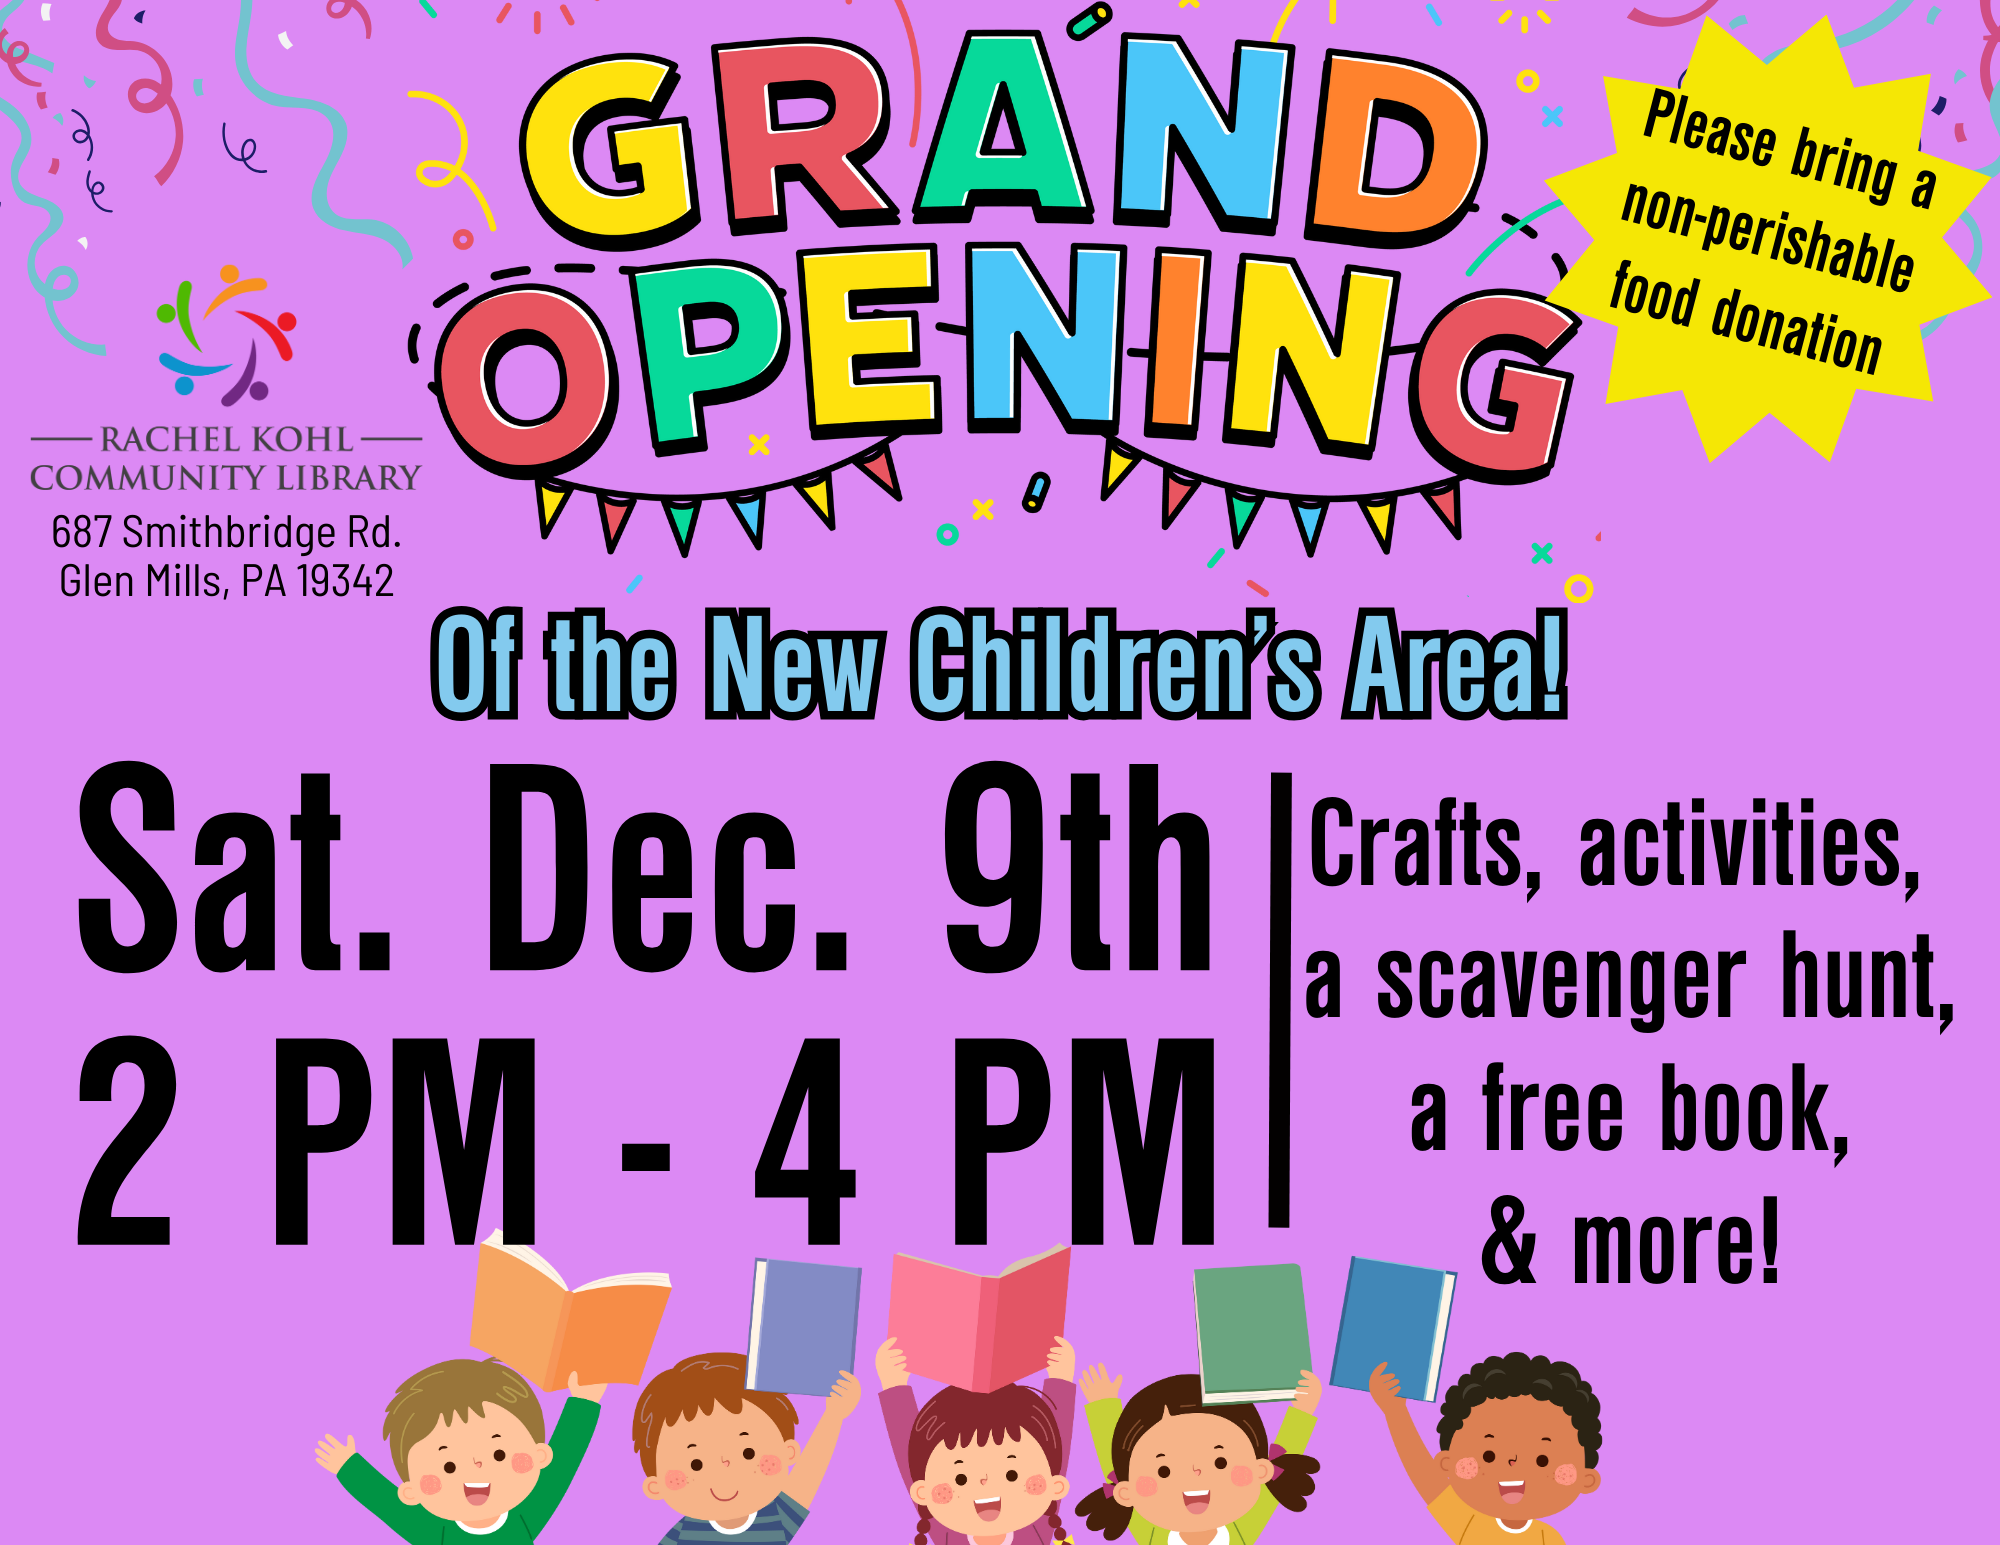 grand opening of the new children's area Sat. Dec. 9th 2 - 4 PM Crafts, activities, a scavenger hunt, a free book, & more! *(Please bring a non-perishable food donation)*